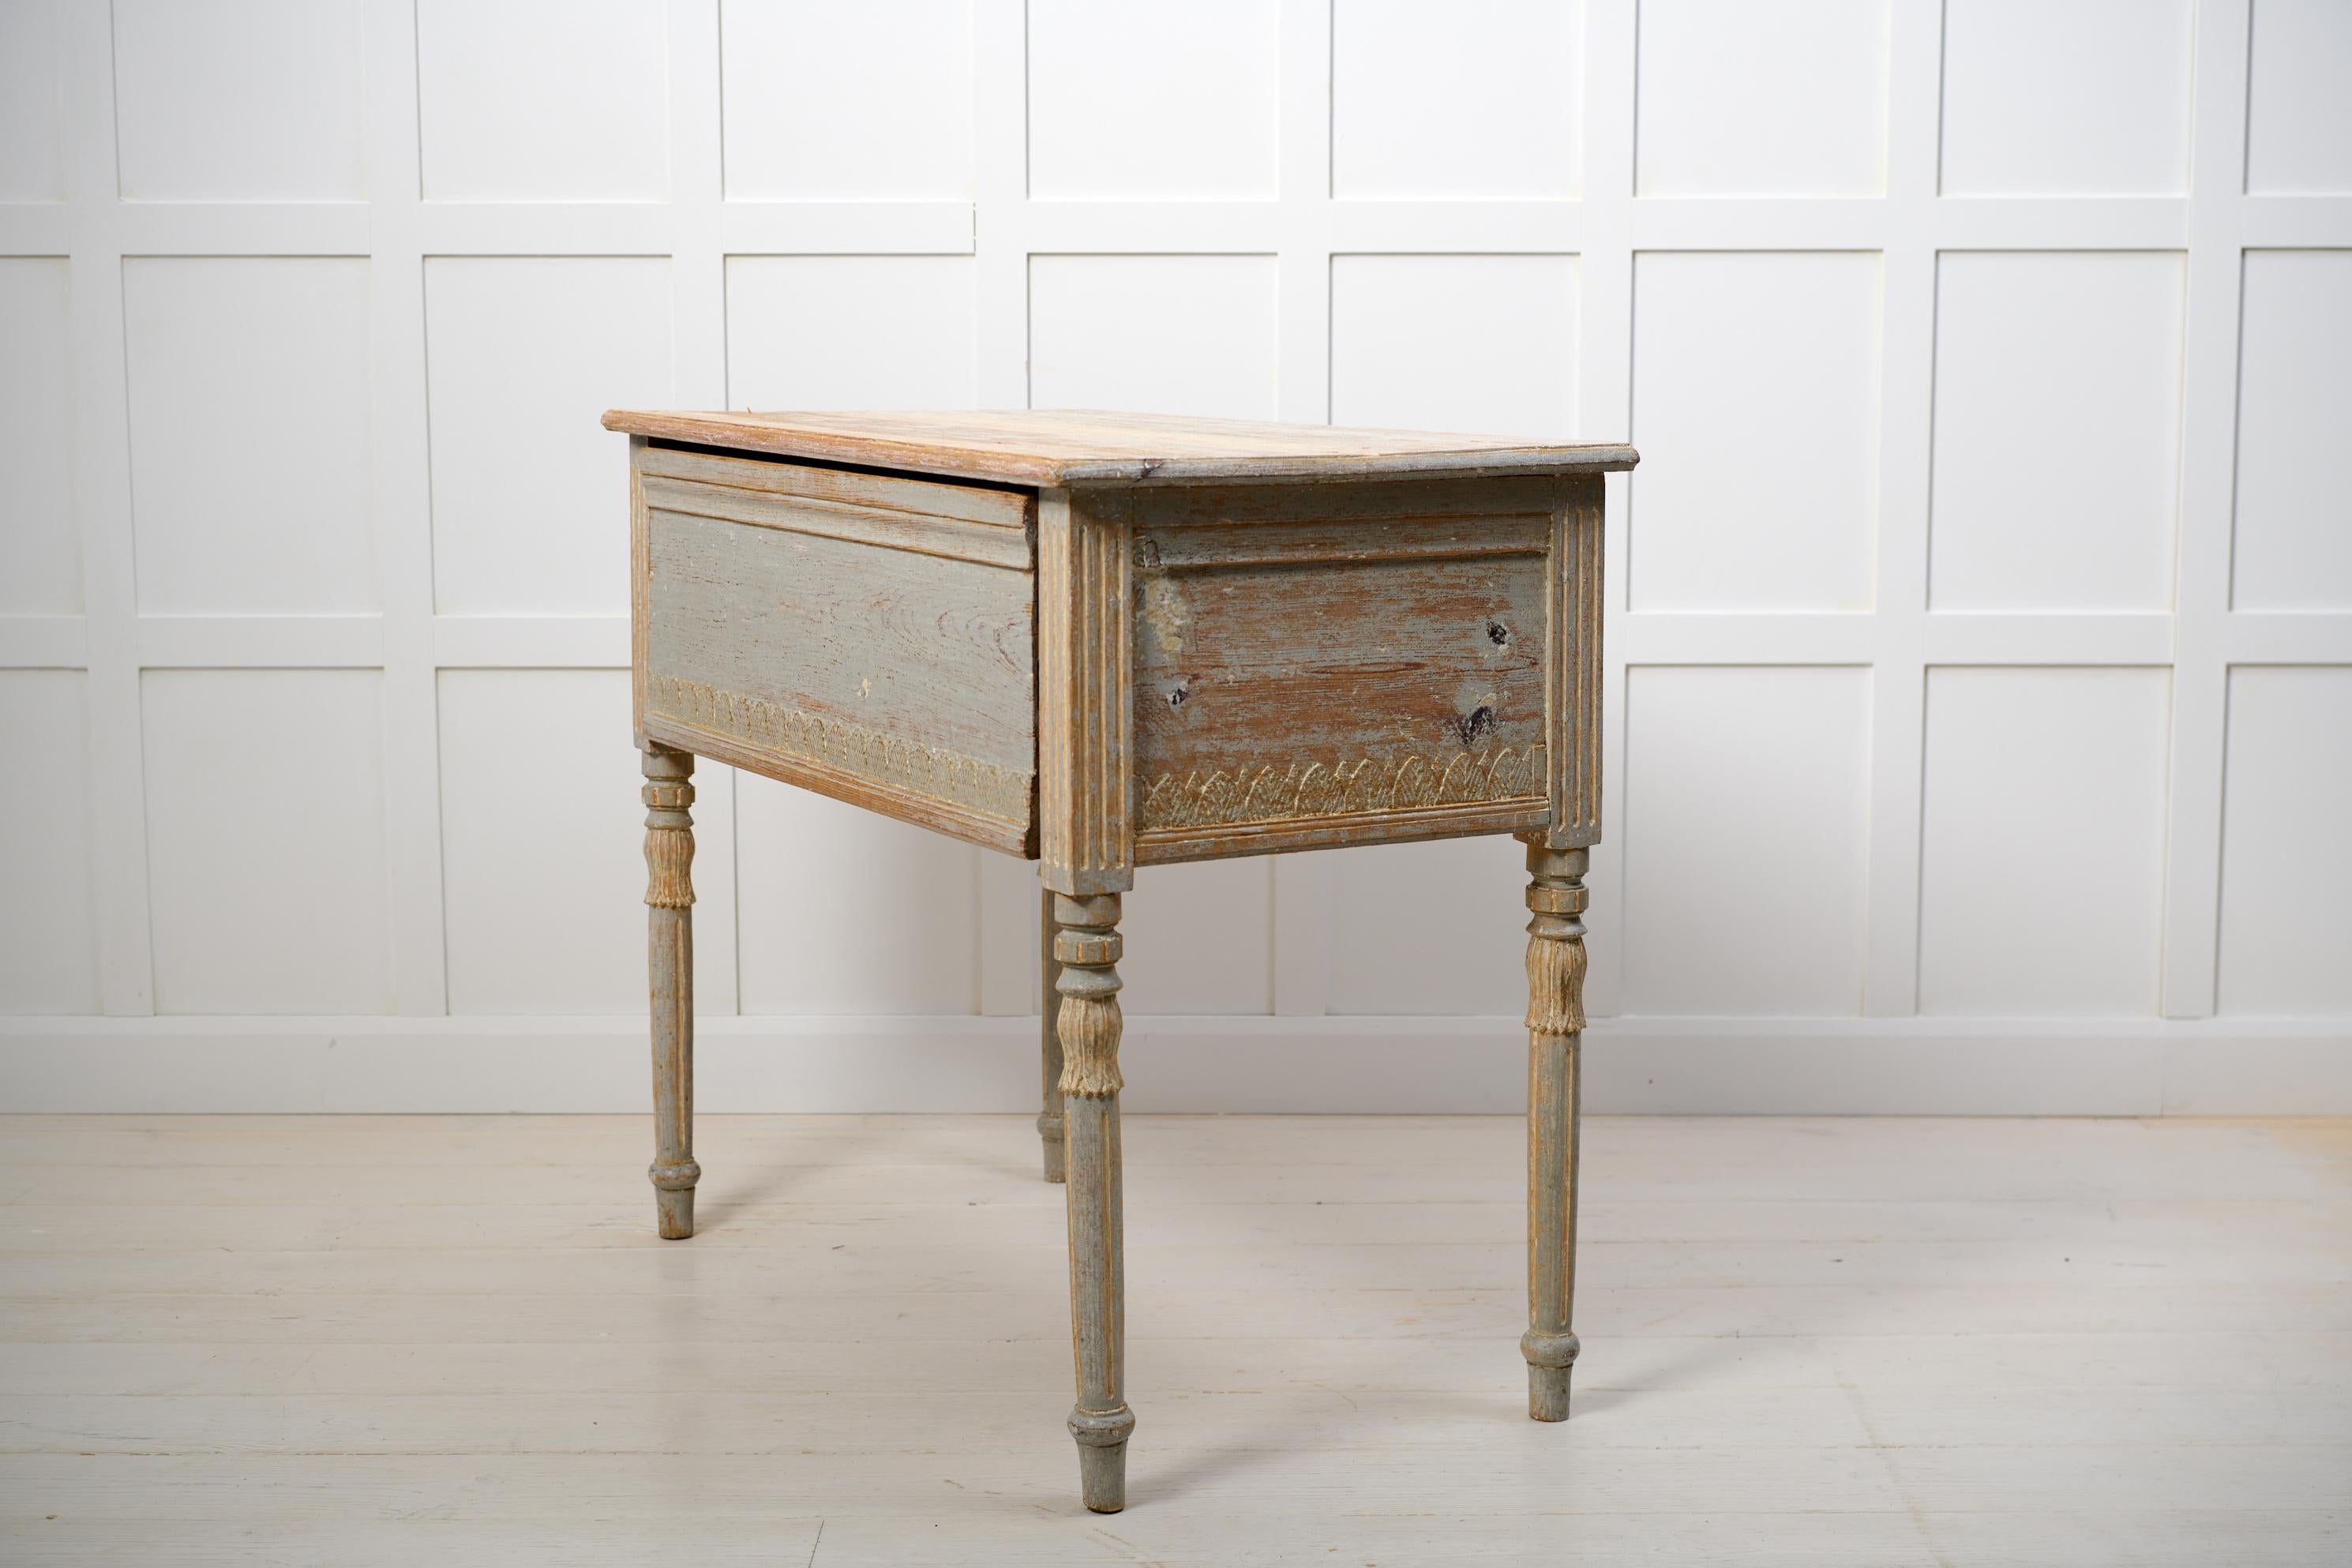 Antique Country Gustavian Style Console Table, Northern Swedish Hand-Made Pine In Good Condition For Sale In Kramfors, SE